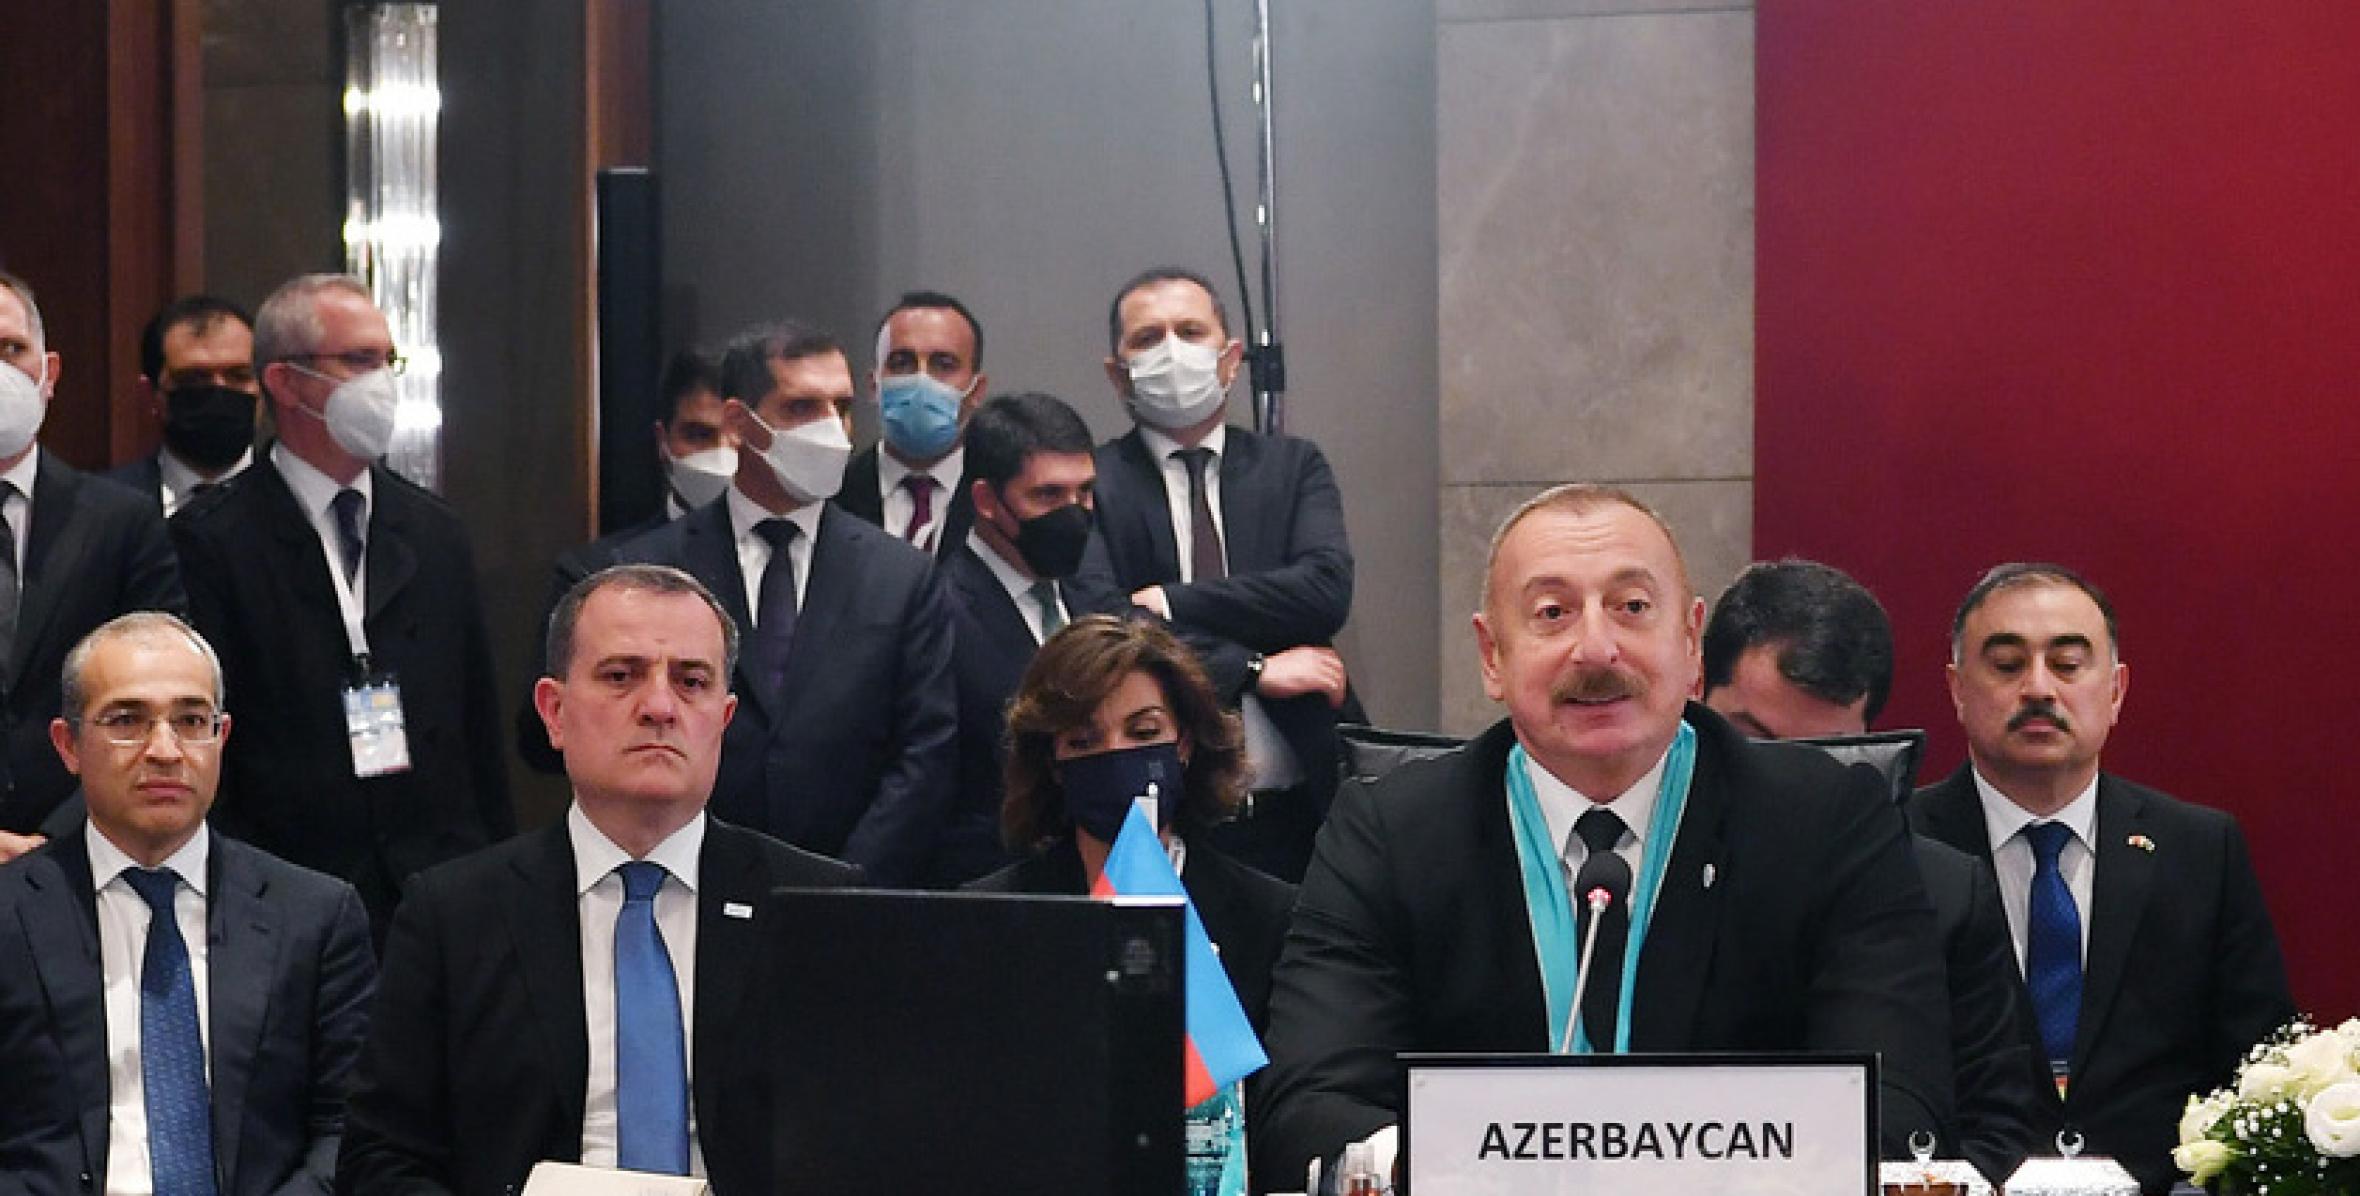 Speech by Ilham Aliyev at the 8th Summit of Cooperation Council of Turkic-Speaking States